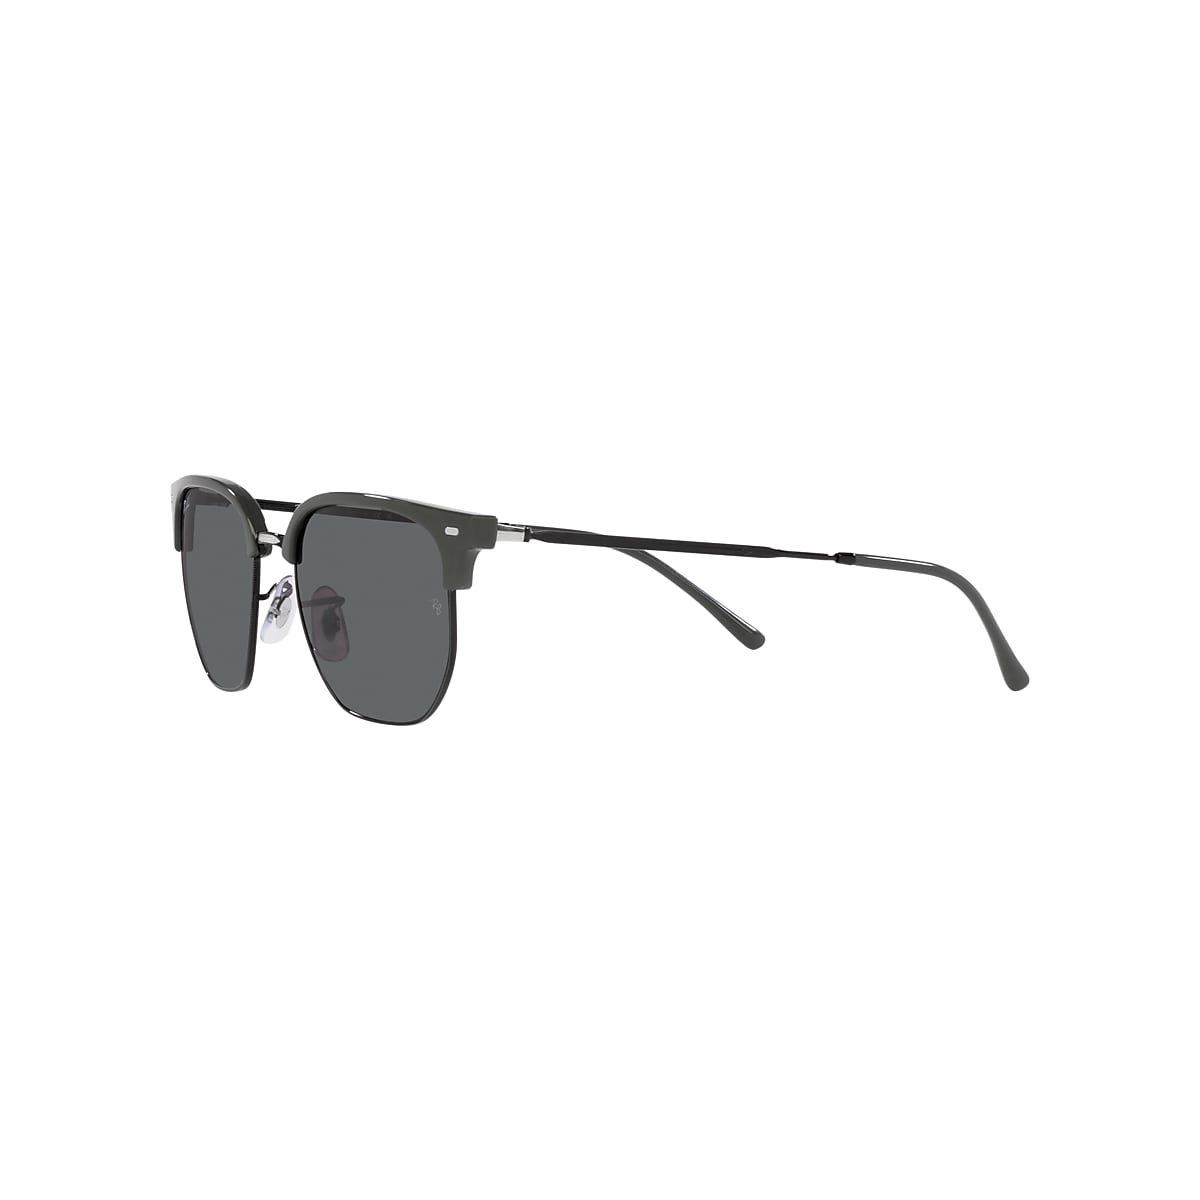 NEW CLUBMASTER Sunglasses in Grey On Black and Dark Grey